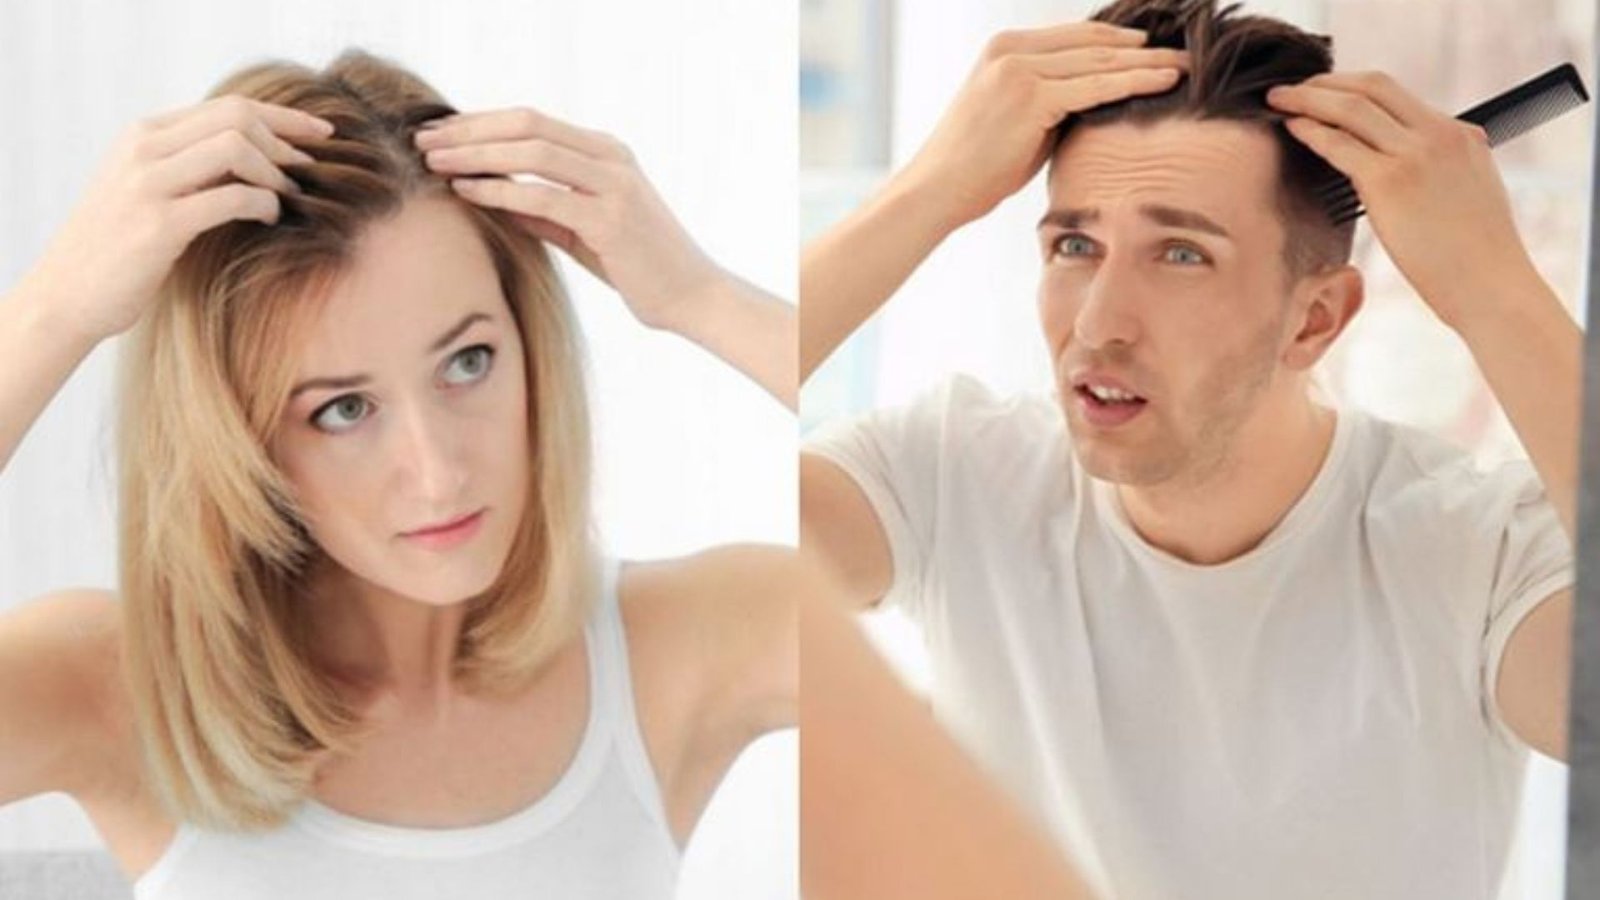 this image shows Hair Maintenance for both men and women